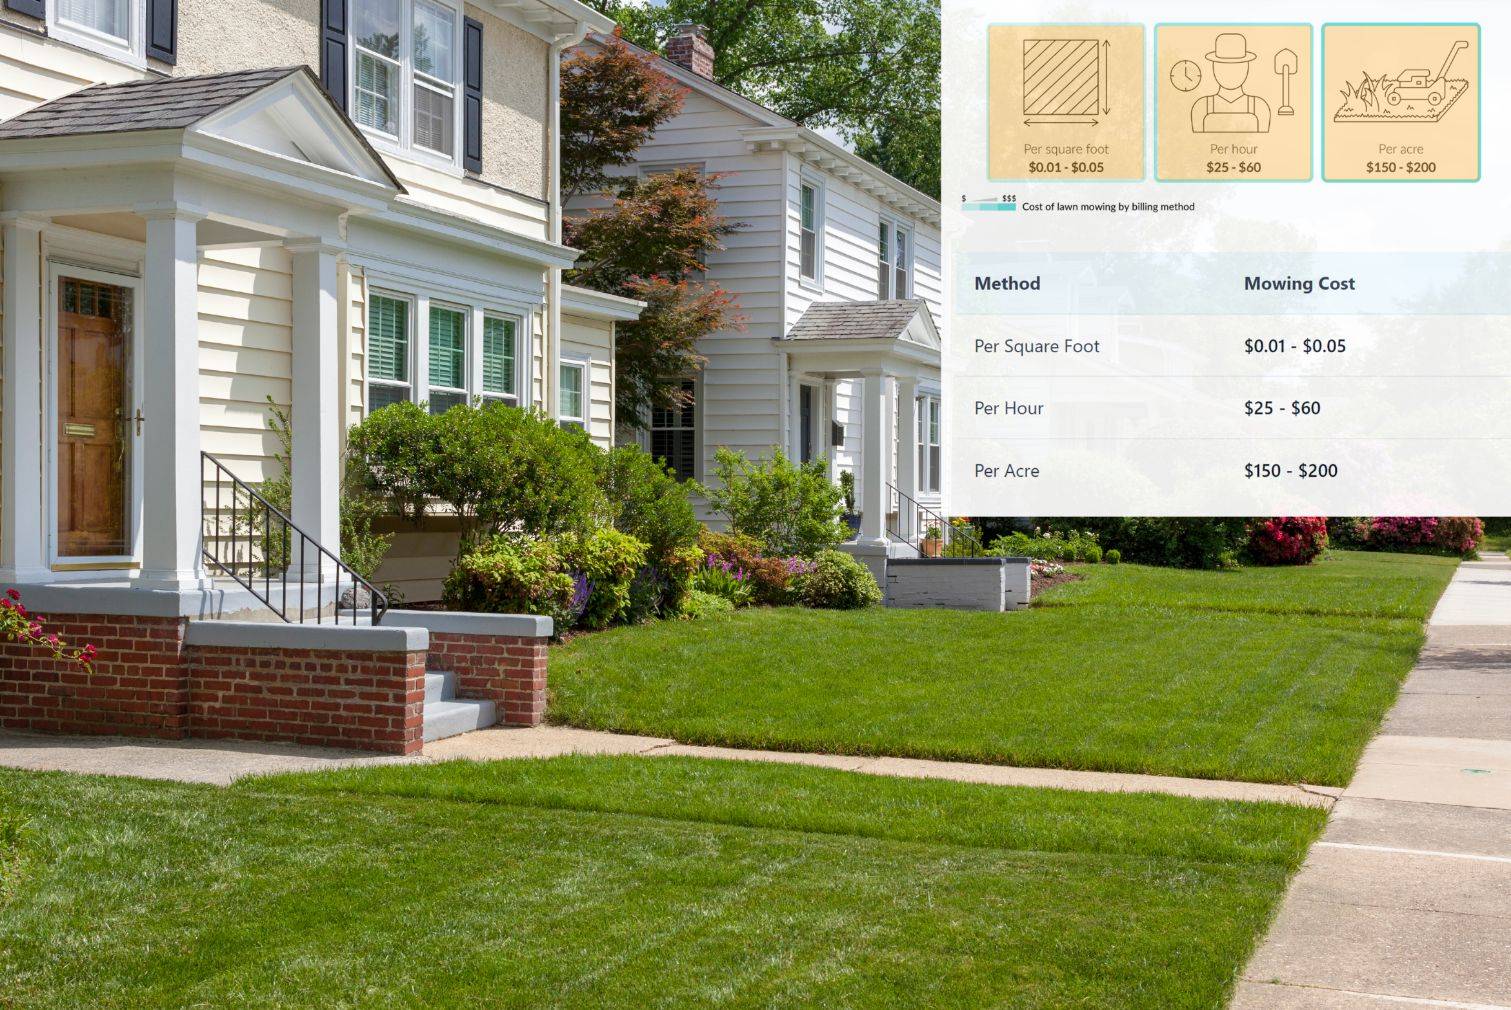 An image showing a well-manicured lawn with a price tag indicating the cost of lawn care-including how much does lawn care cost